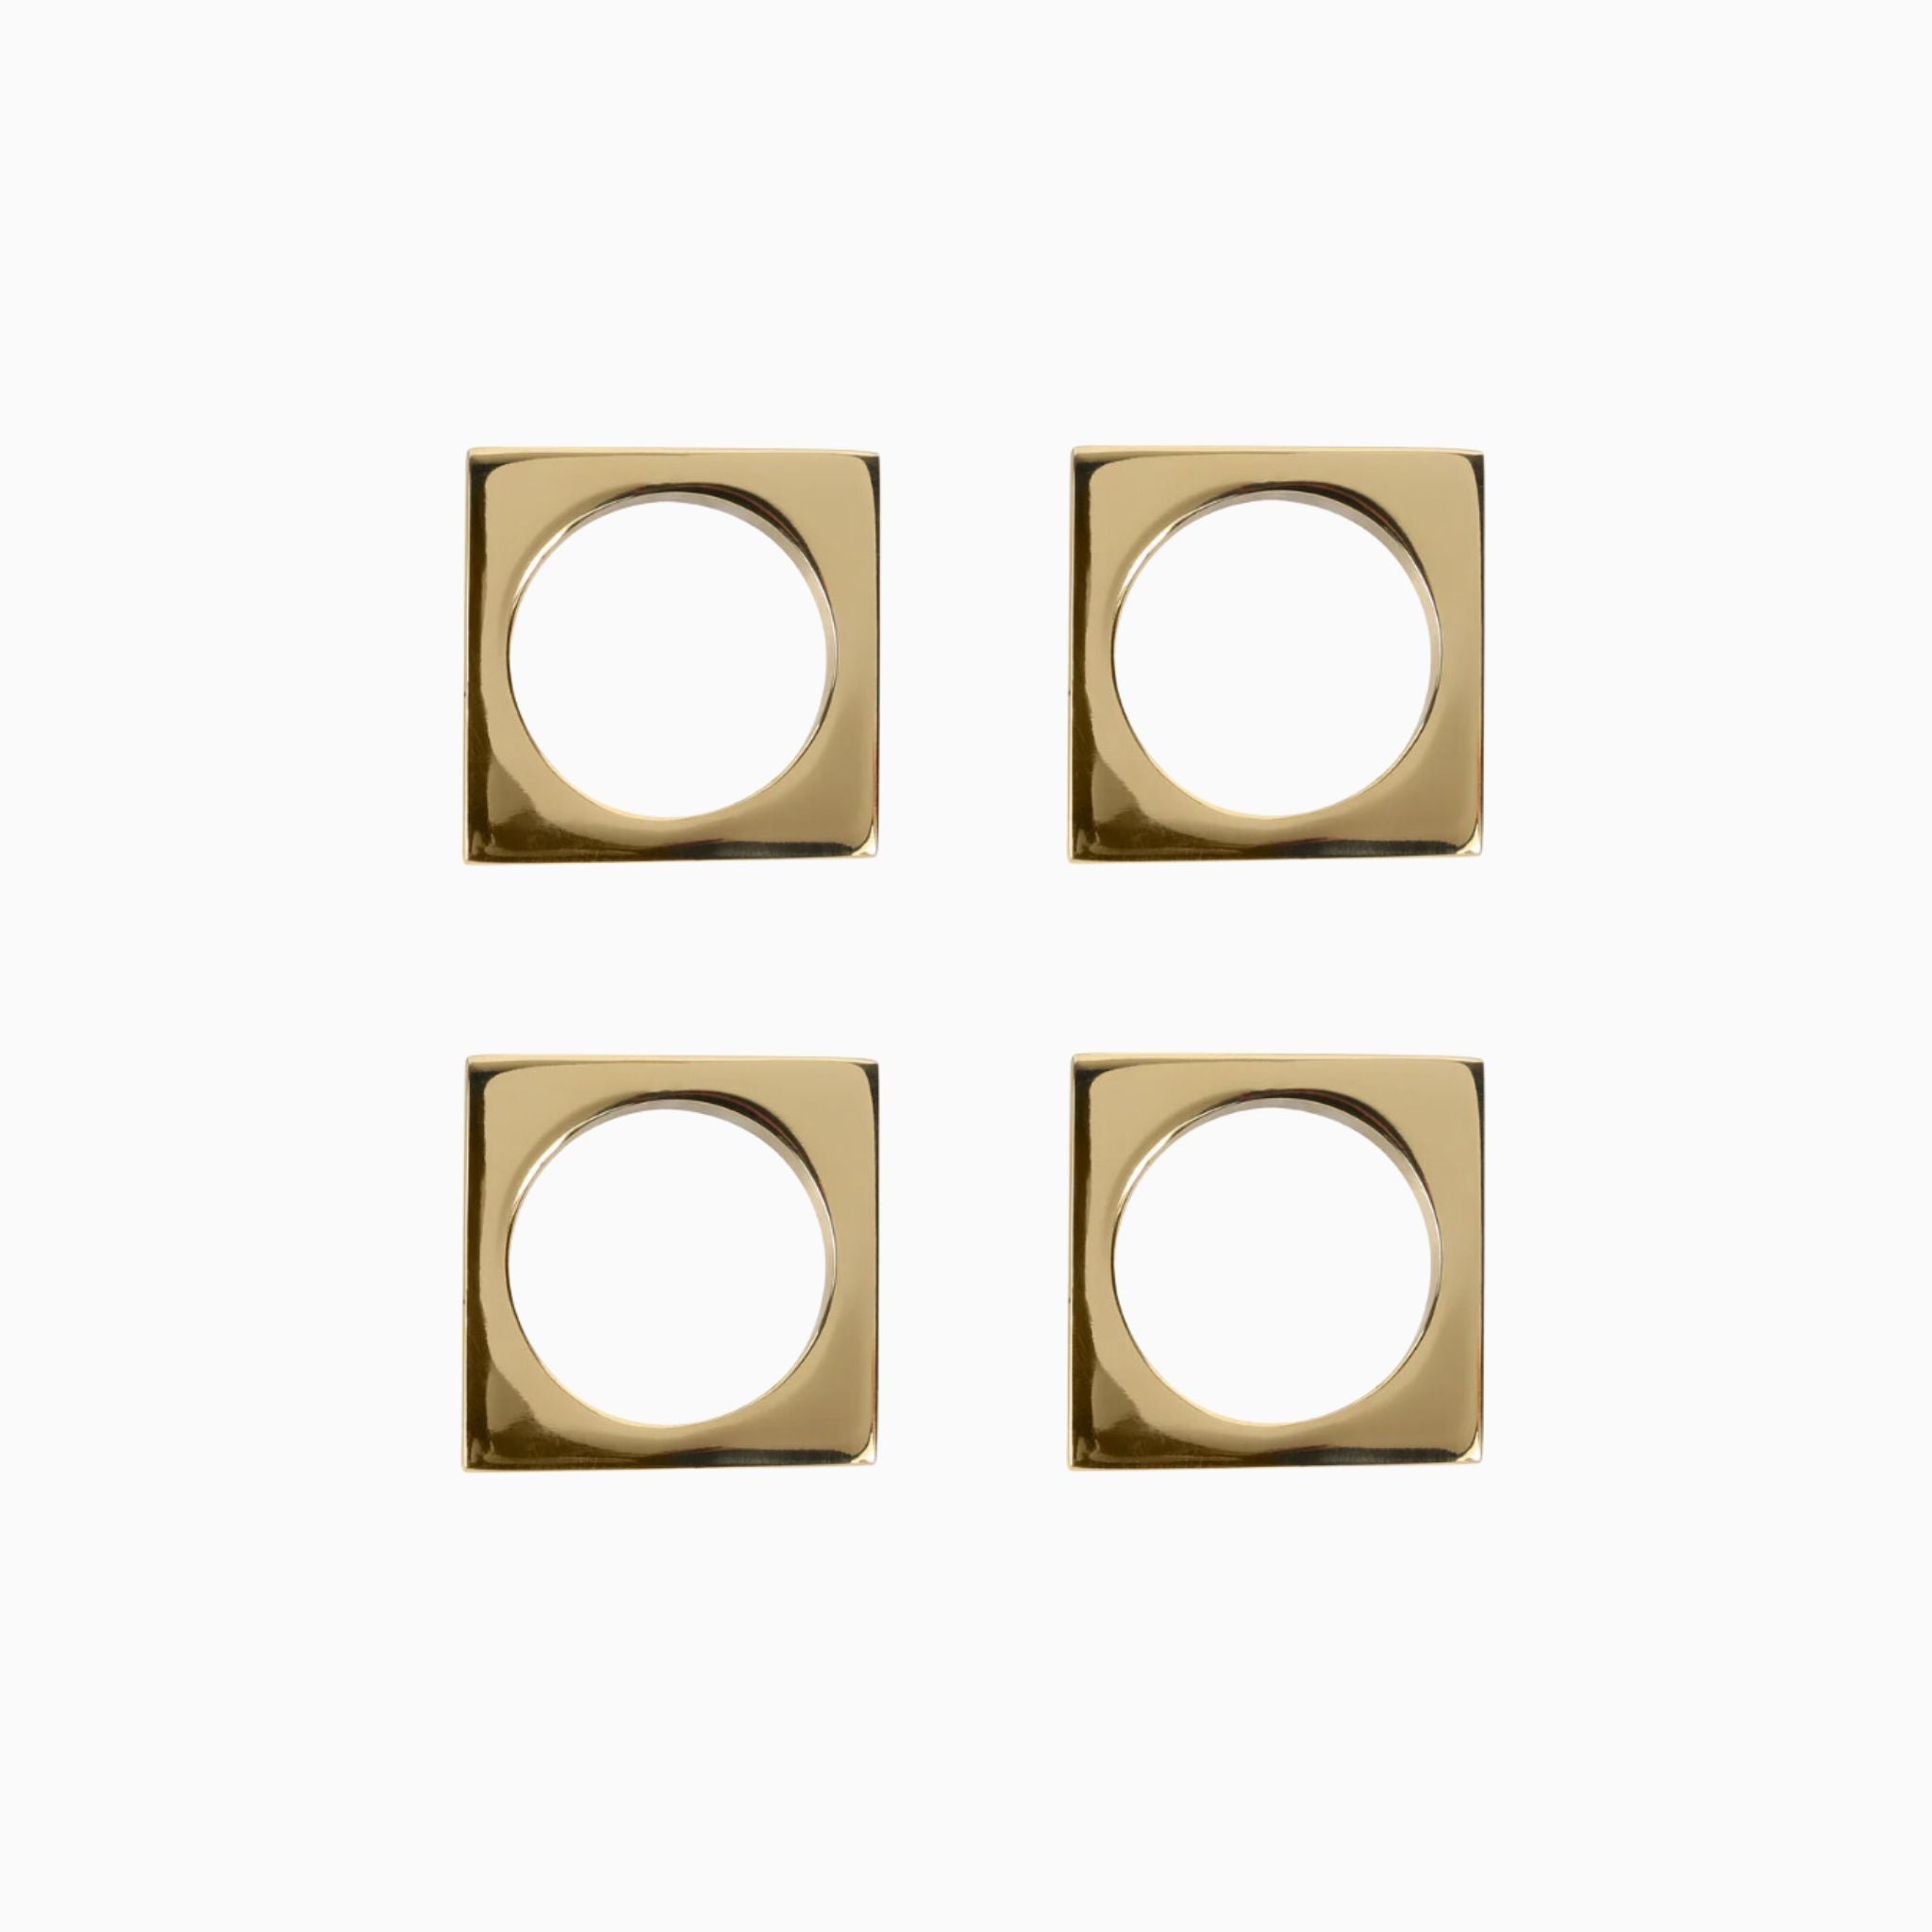 Simply Elevated - Brass Napkin Rings - A circle in a square, these weighty solid metal napkin rings embody geometric simplicity at its very best. Sold in pairs of two, they are available in either solid brass, or silver-plated brass.